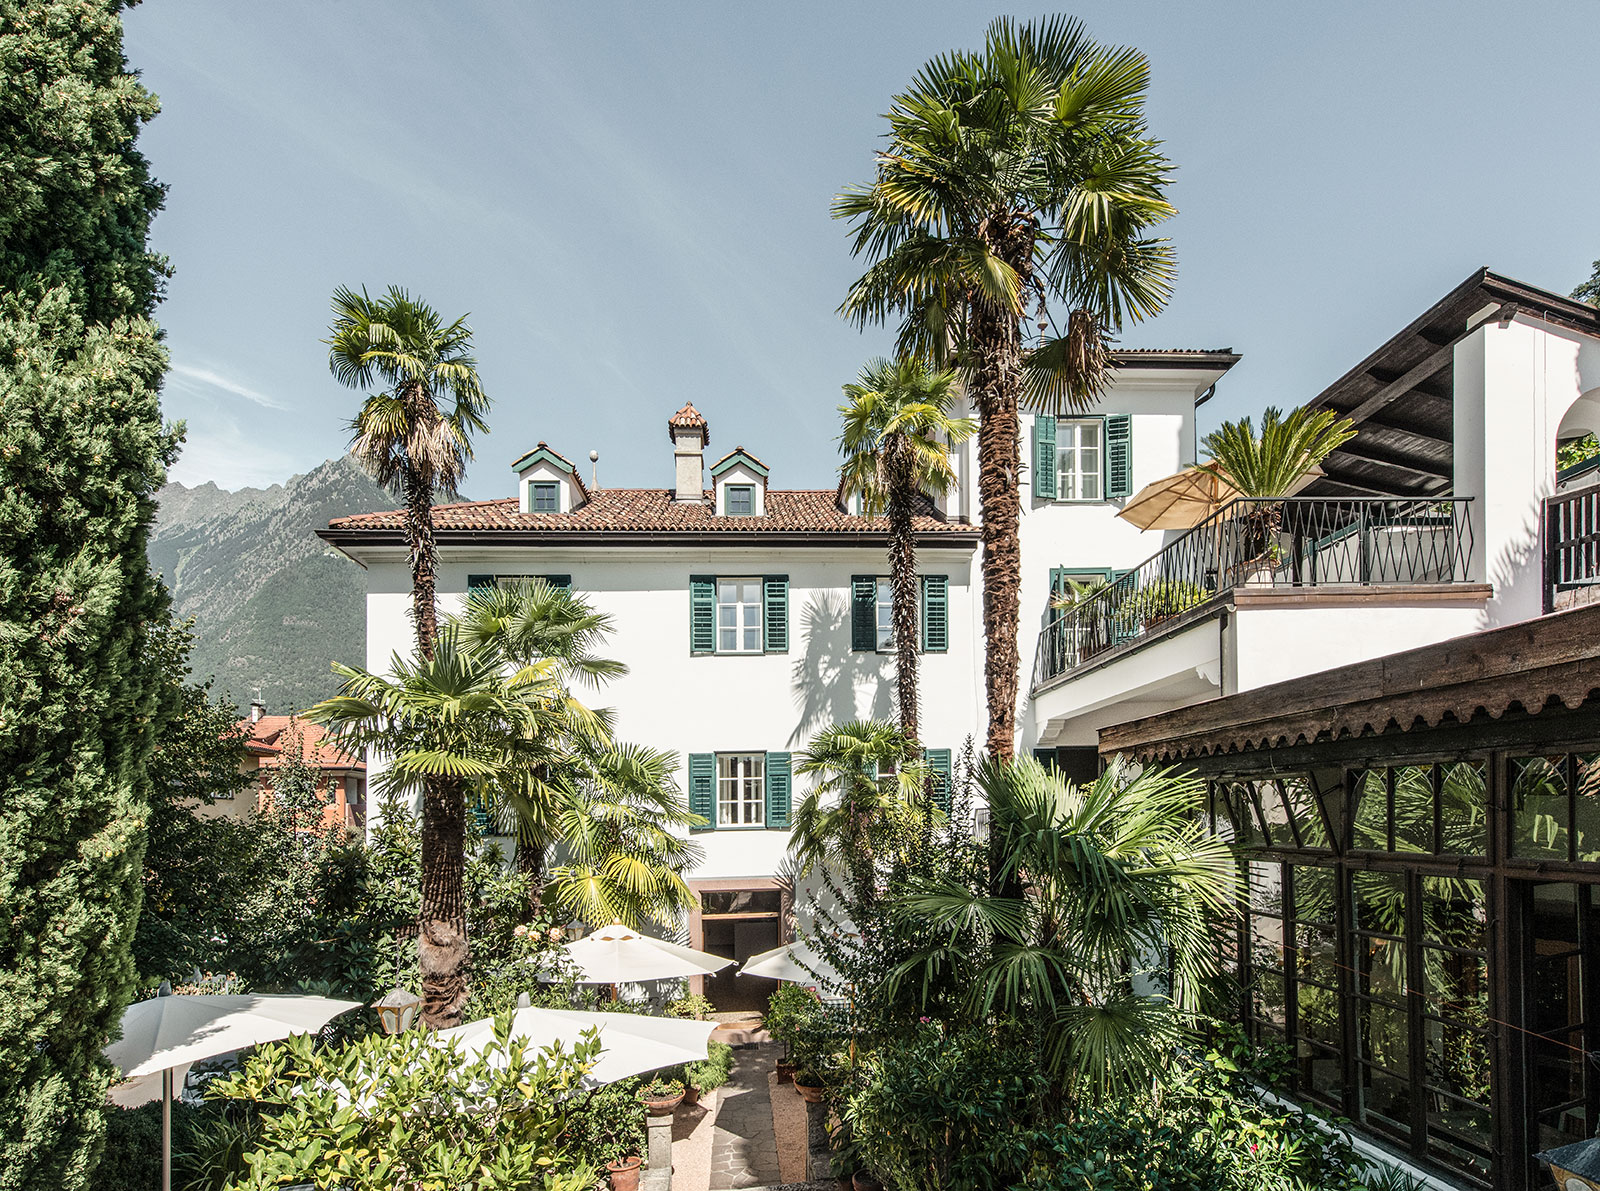 Pretty Hotels: The Perfect Guide to Merano / South Tyrol (Image 2)